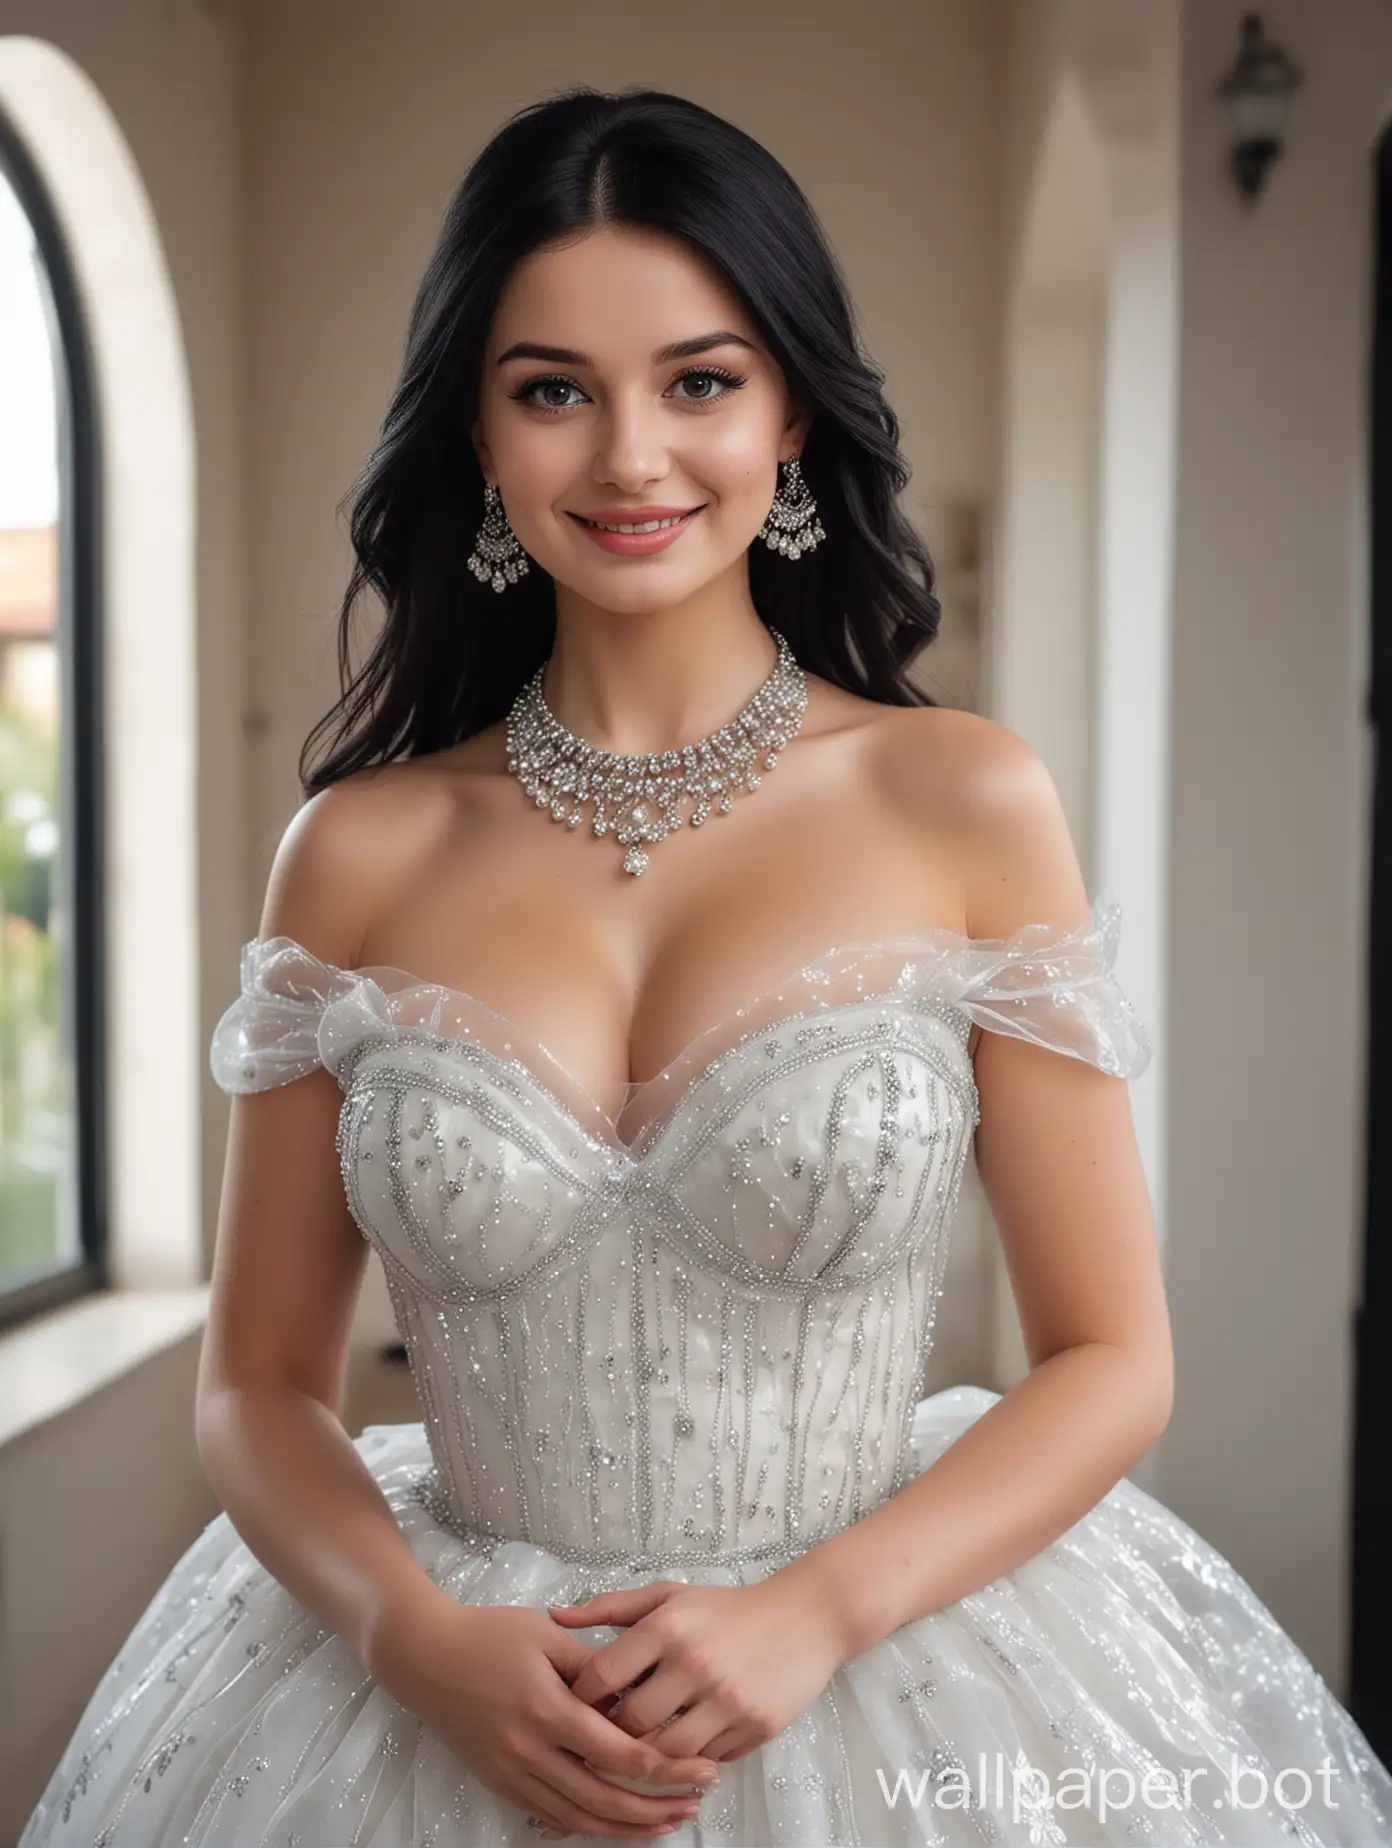 Generate an image of the most beautiful actress from Czech Republic, a cute and pretty girl with large breasts, wearing a transparent Ball Gown dress, fair white skin, and long black hair. She has a round face and a smile. The background is a modern house interior. The camera captures her from head to stomach. She is wearing makeup and accessories including a necklace, jhumka earring, and bracelet.